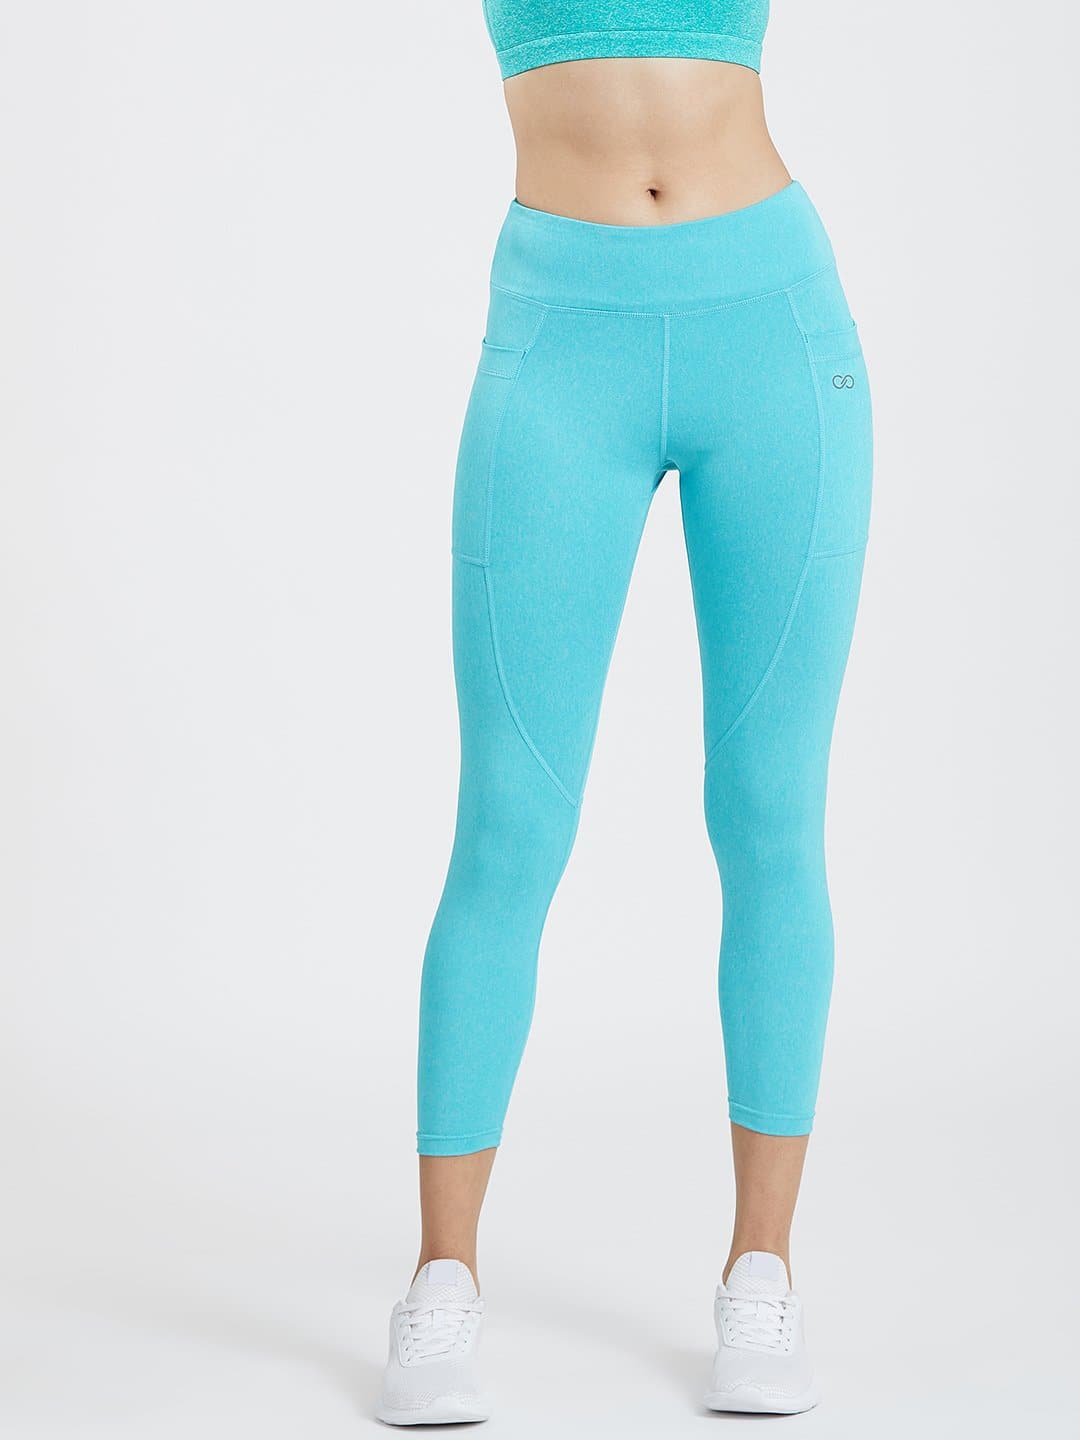 Maxtreme Power me Pacific Blue Ankle Pocket Leggings